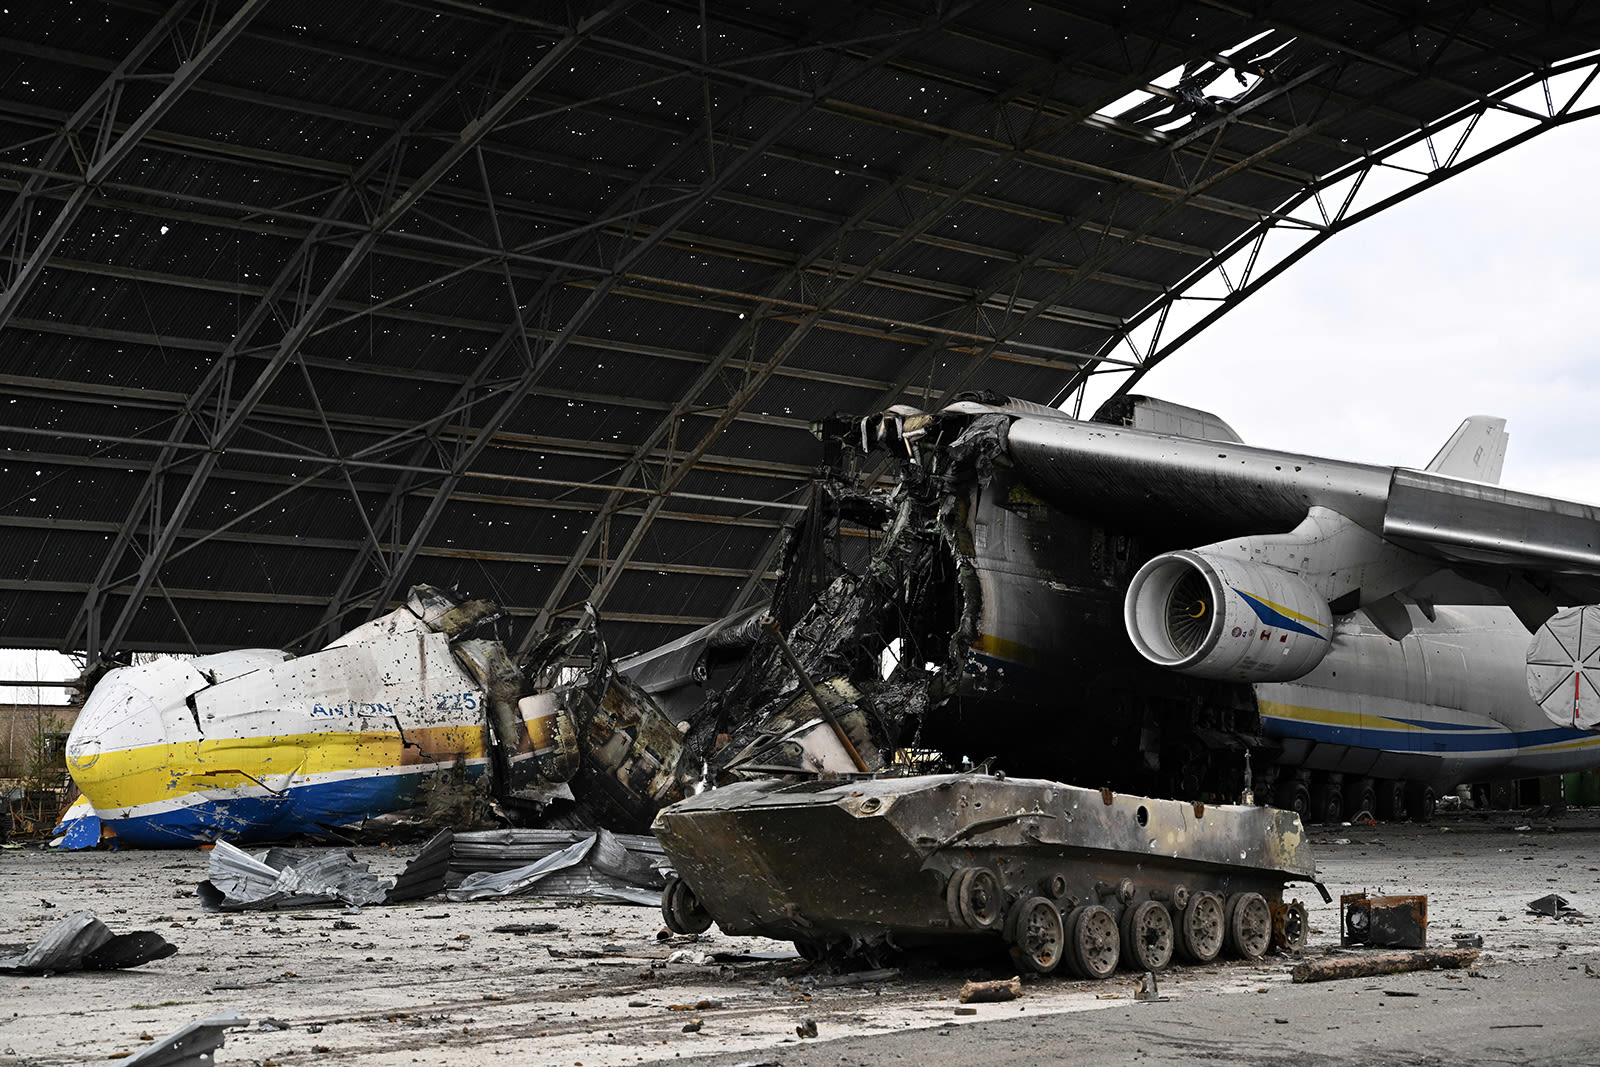 After being destroyed in the Russian occupation of Ukraine, can the largest aircraft in the world fly again?